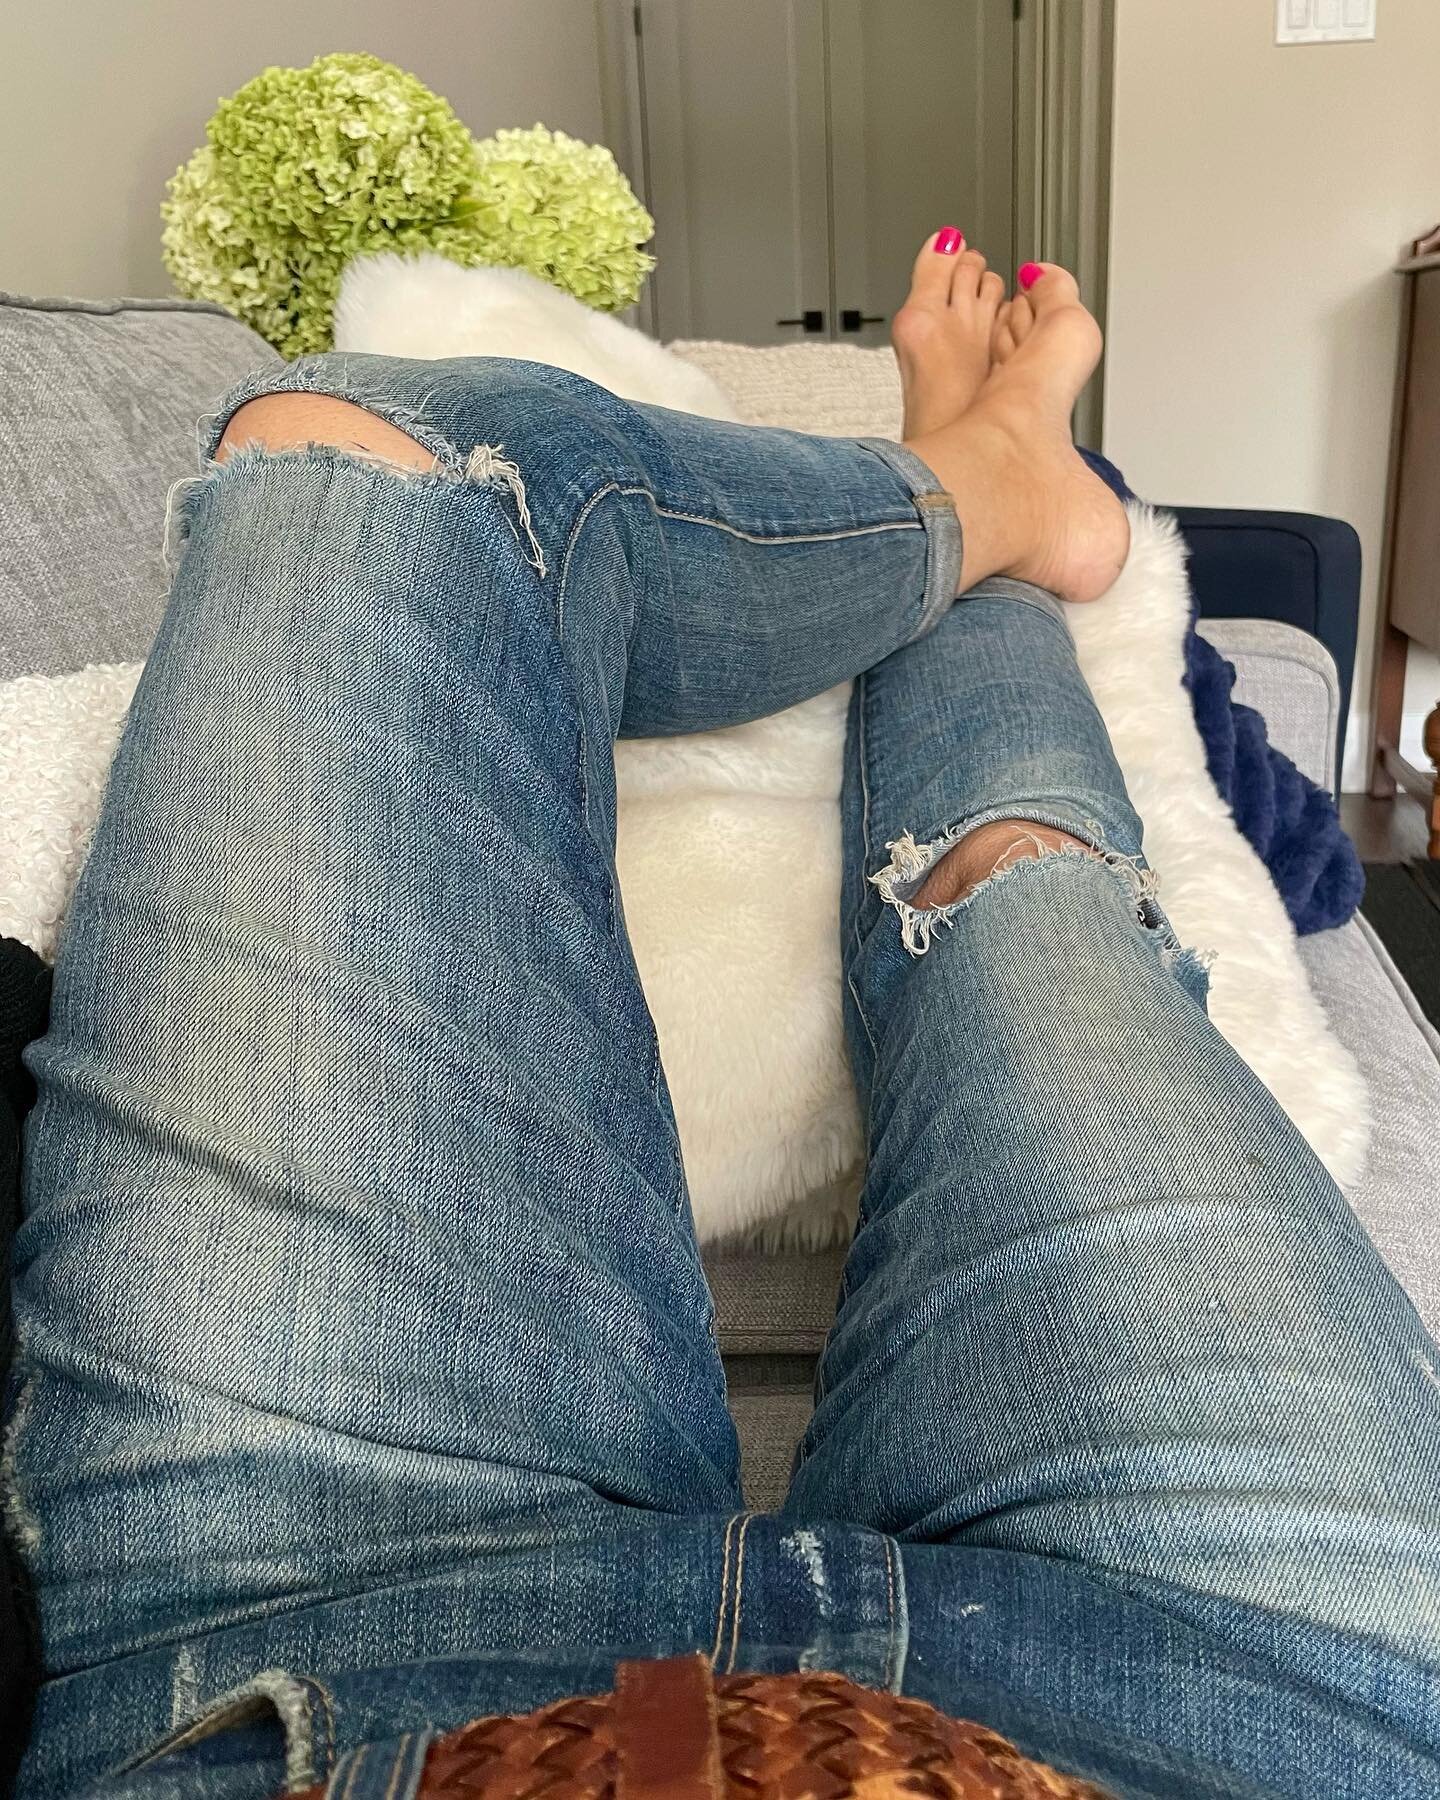 When is the last time you put your feet up and rested? 

#selfcare #selfcaretips #selflove #lovewhoyouare #renabellabeauty #renabella #skincare #relax #relaxing #takeiteasy